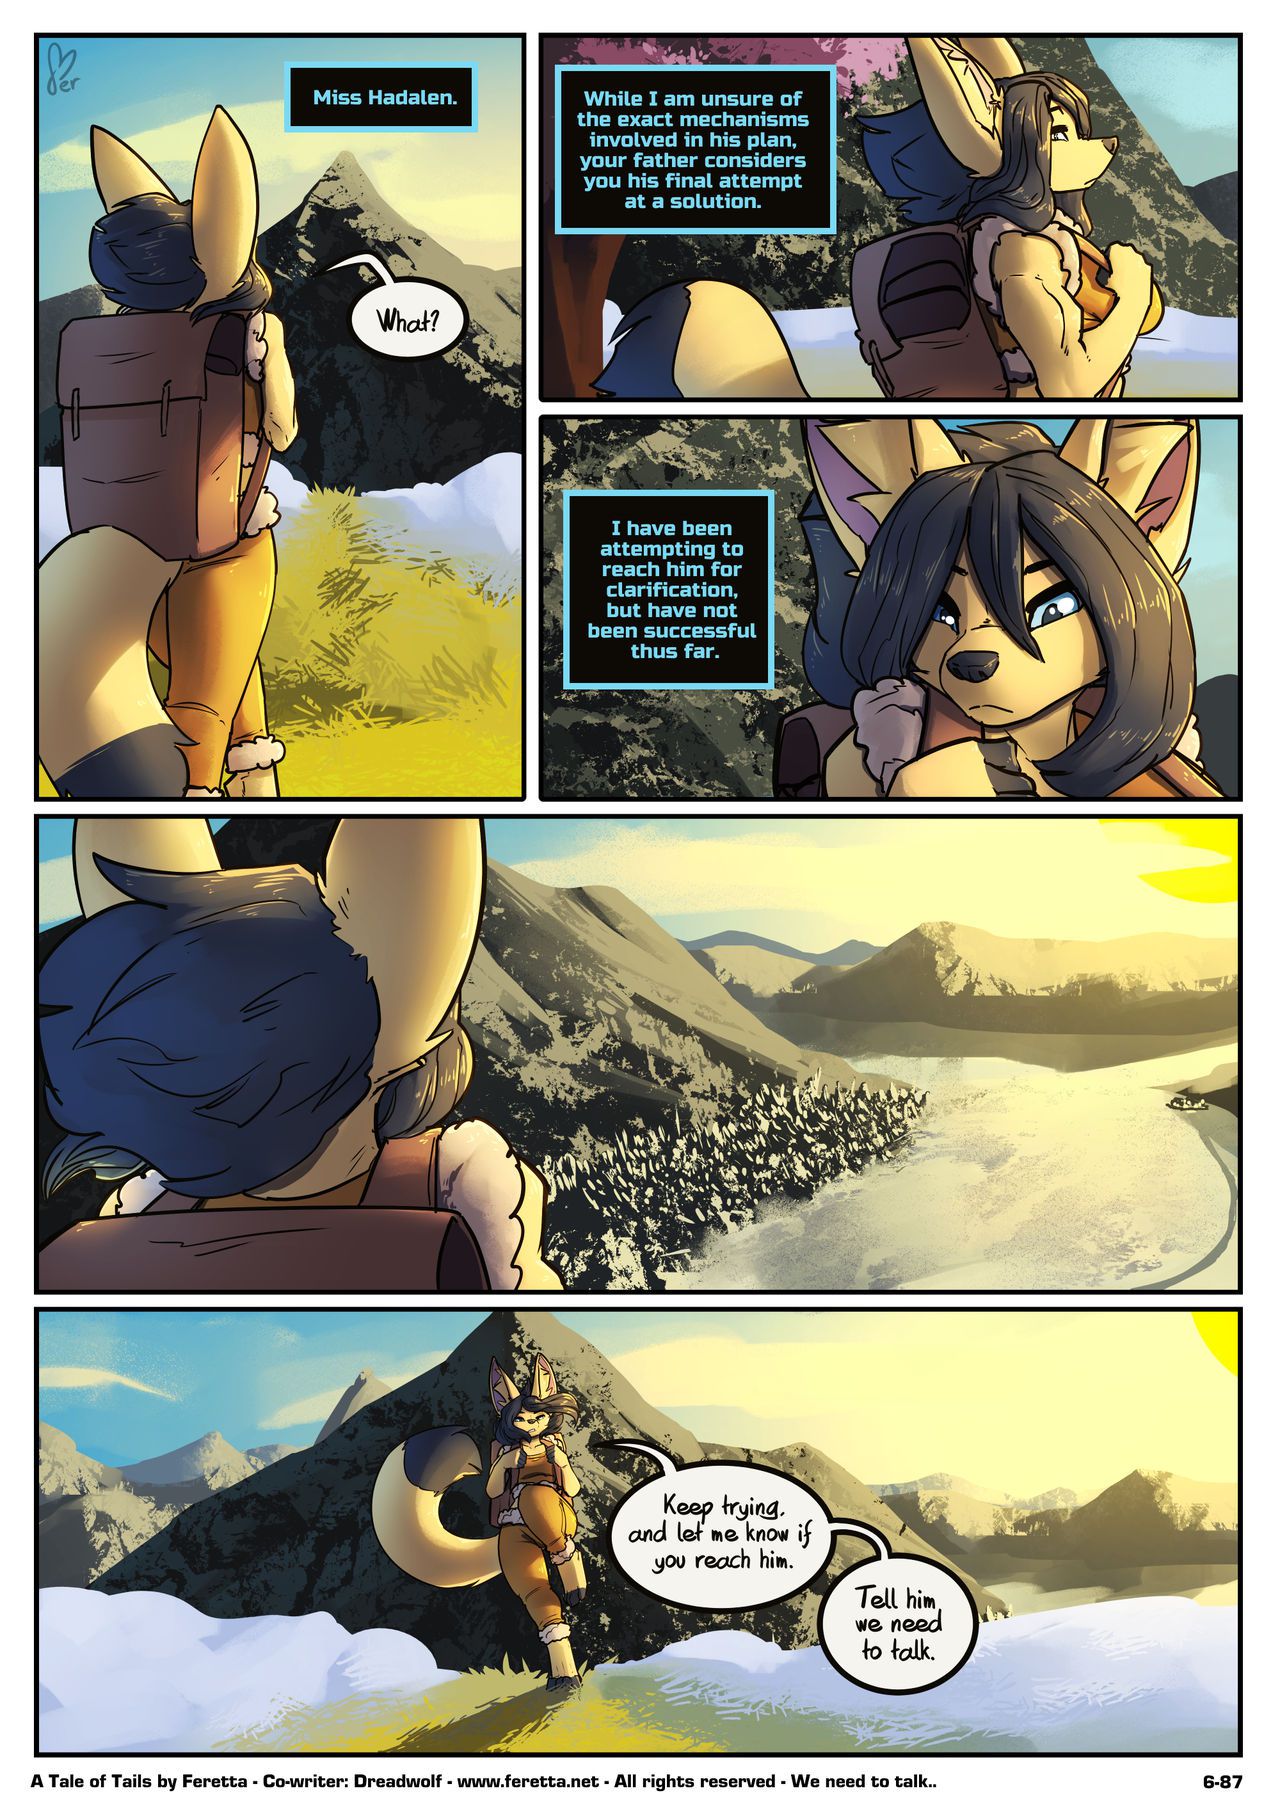 [Feretta] Farellian Legends: A Tale of Tails (w/Extras) [Ongoing] 382